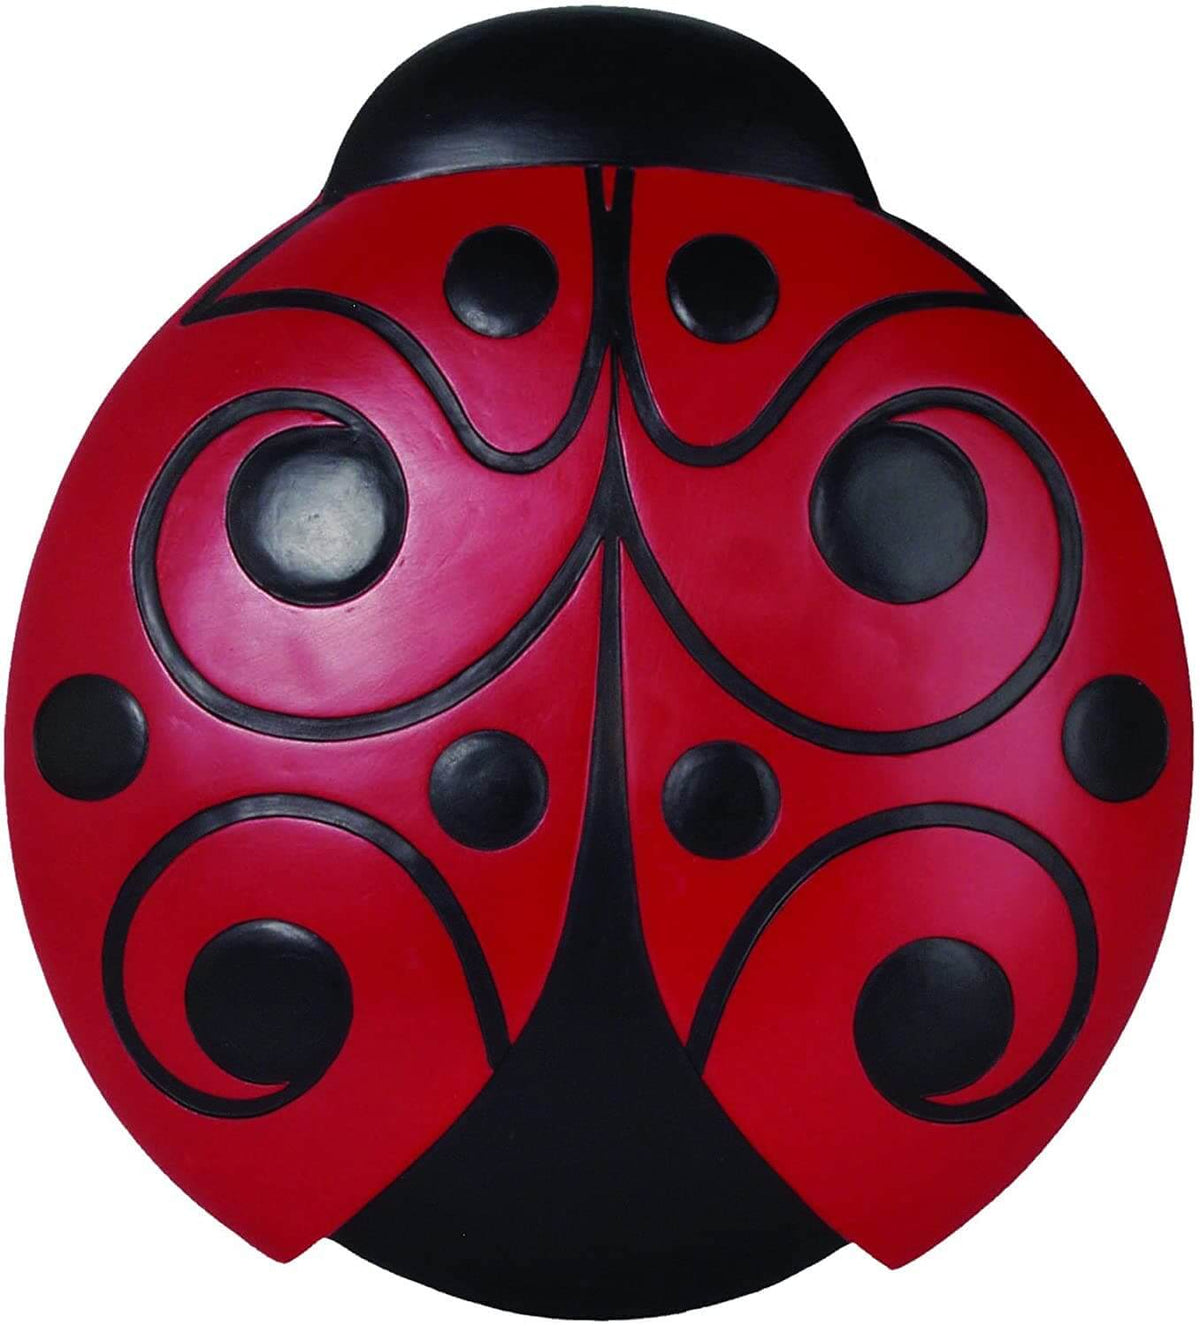 Red and Black Ladybug Decorative Garden Stone- The House of Awareness